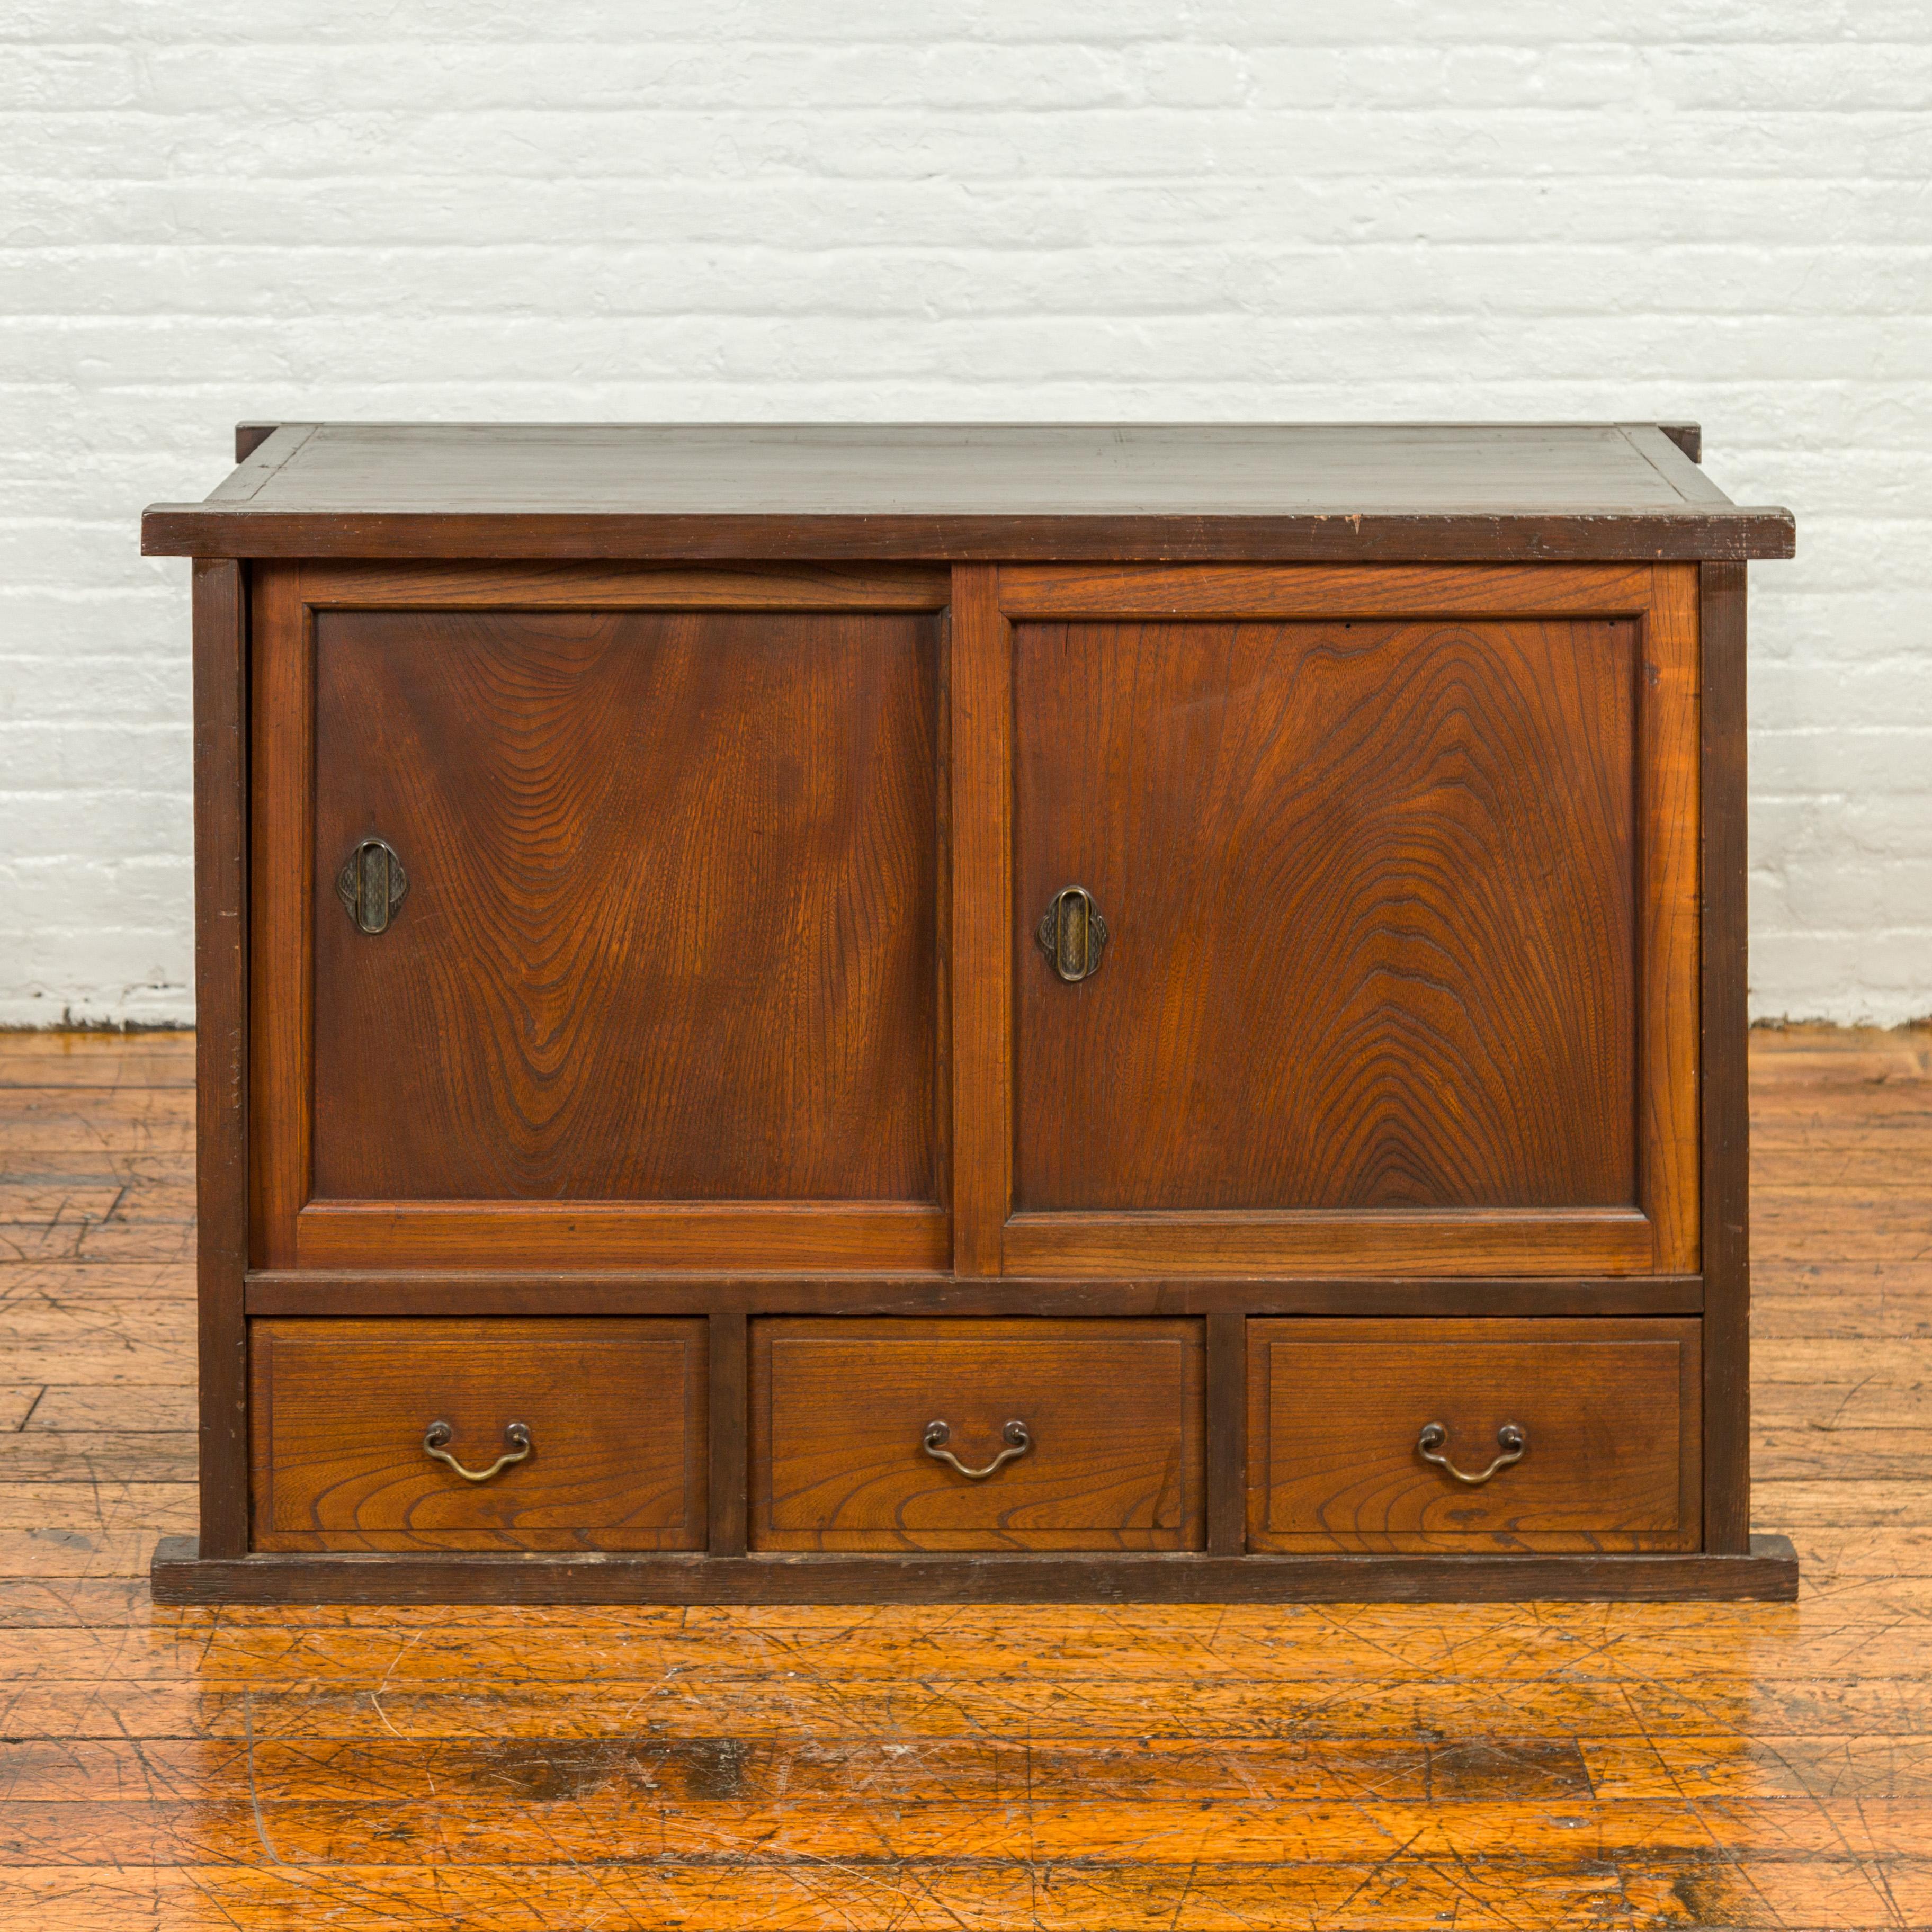 An antique Japanese keyaki wood buffet from the 19th century, with sliding doors and three drawers. Crafted in Japan during the 19th century, this keyaki wood buffet features a rectangular top with protruding corners, sitting above two sliding doors